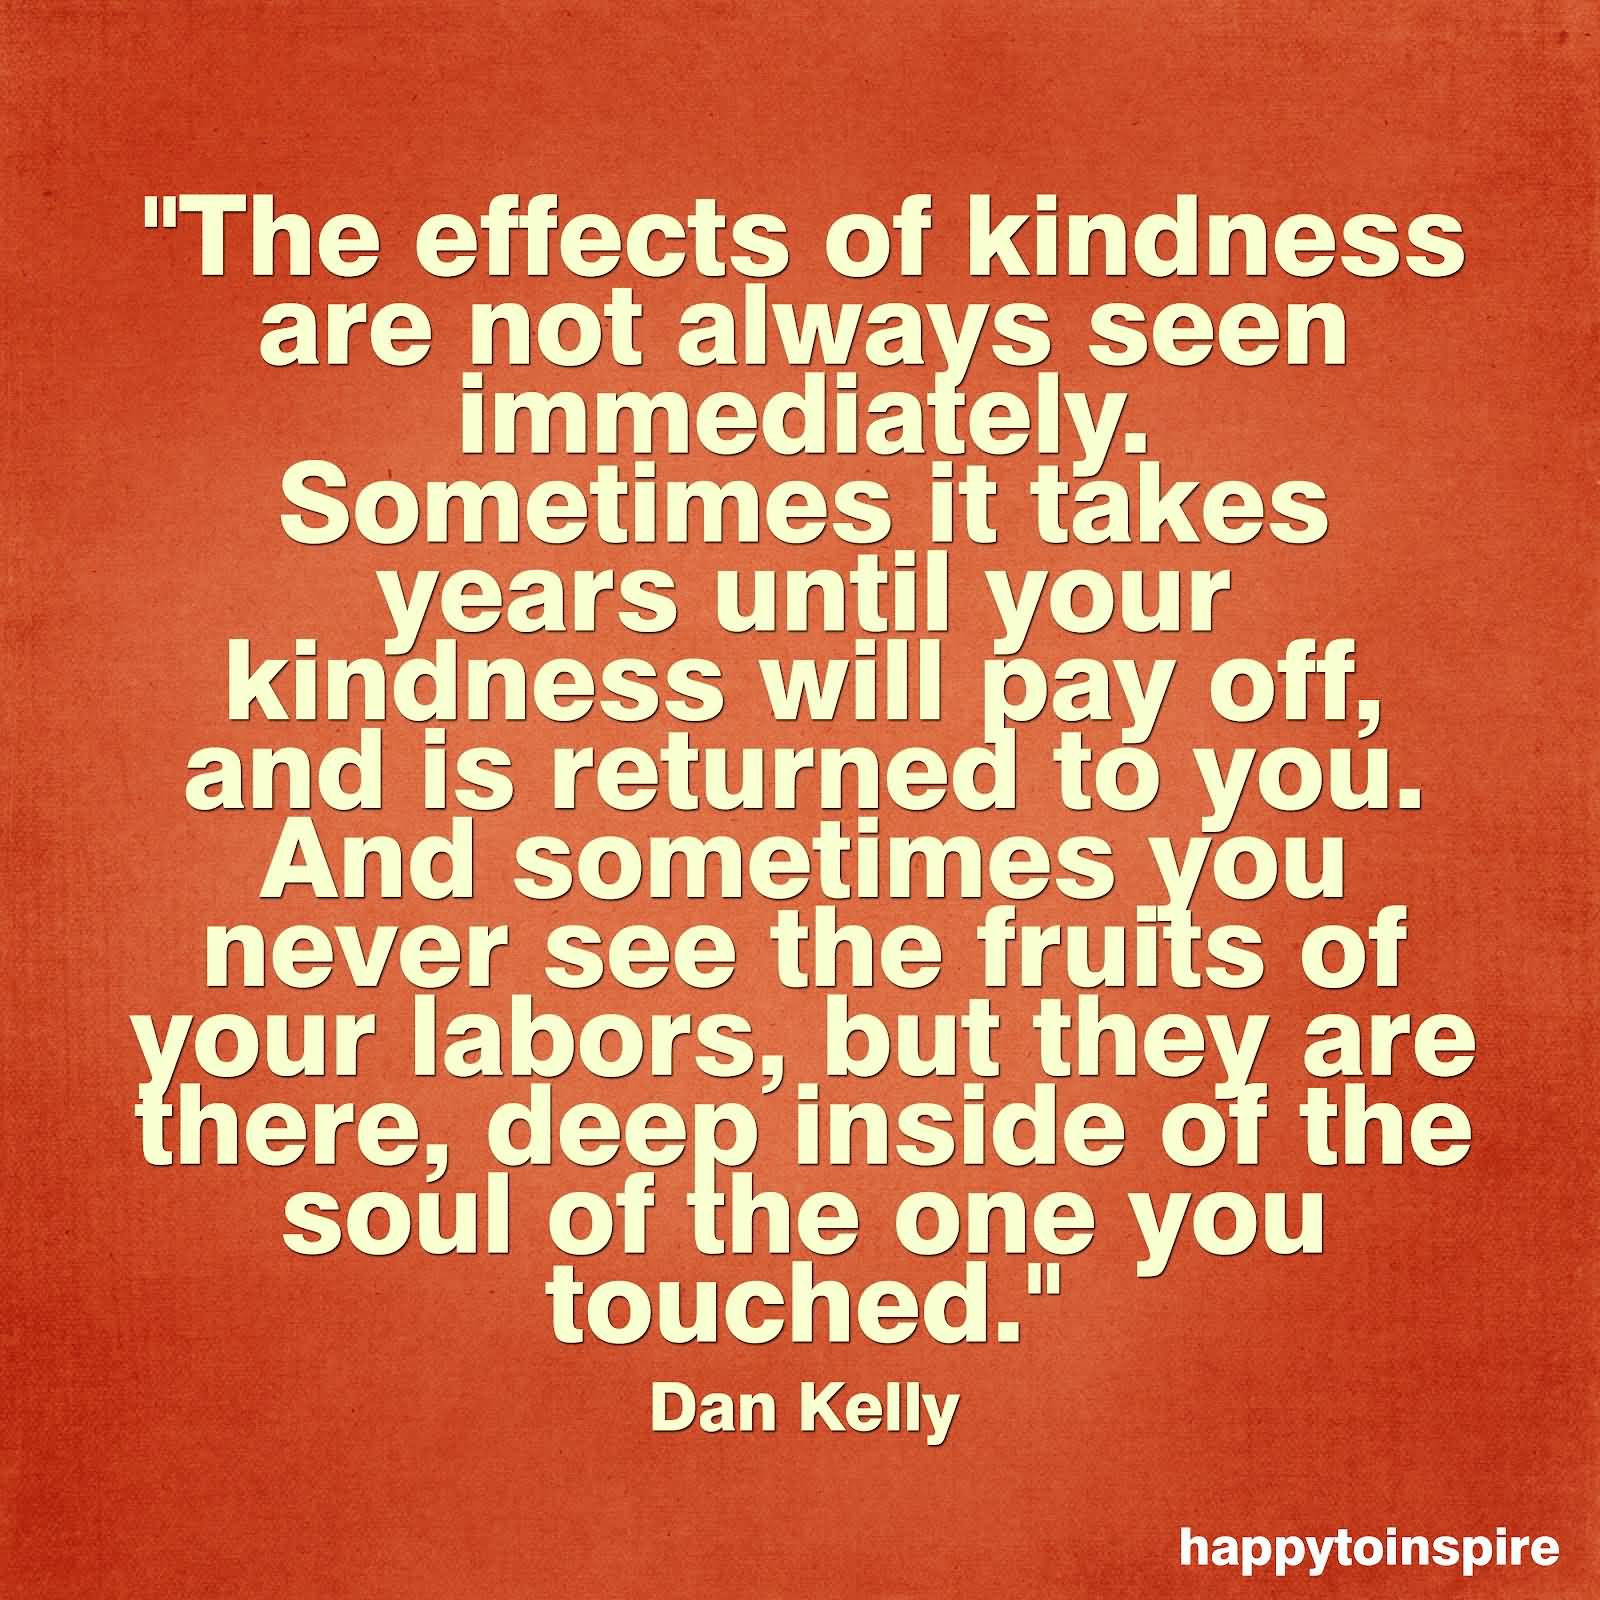 The effects of kindness are not always seen immediately. Sometimes it takes years until your kindness will pay off, and is returned to you. And sometimes you .... - Dan Kelly